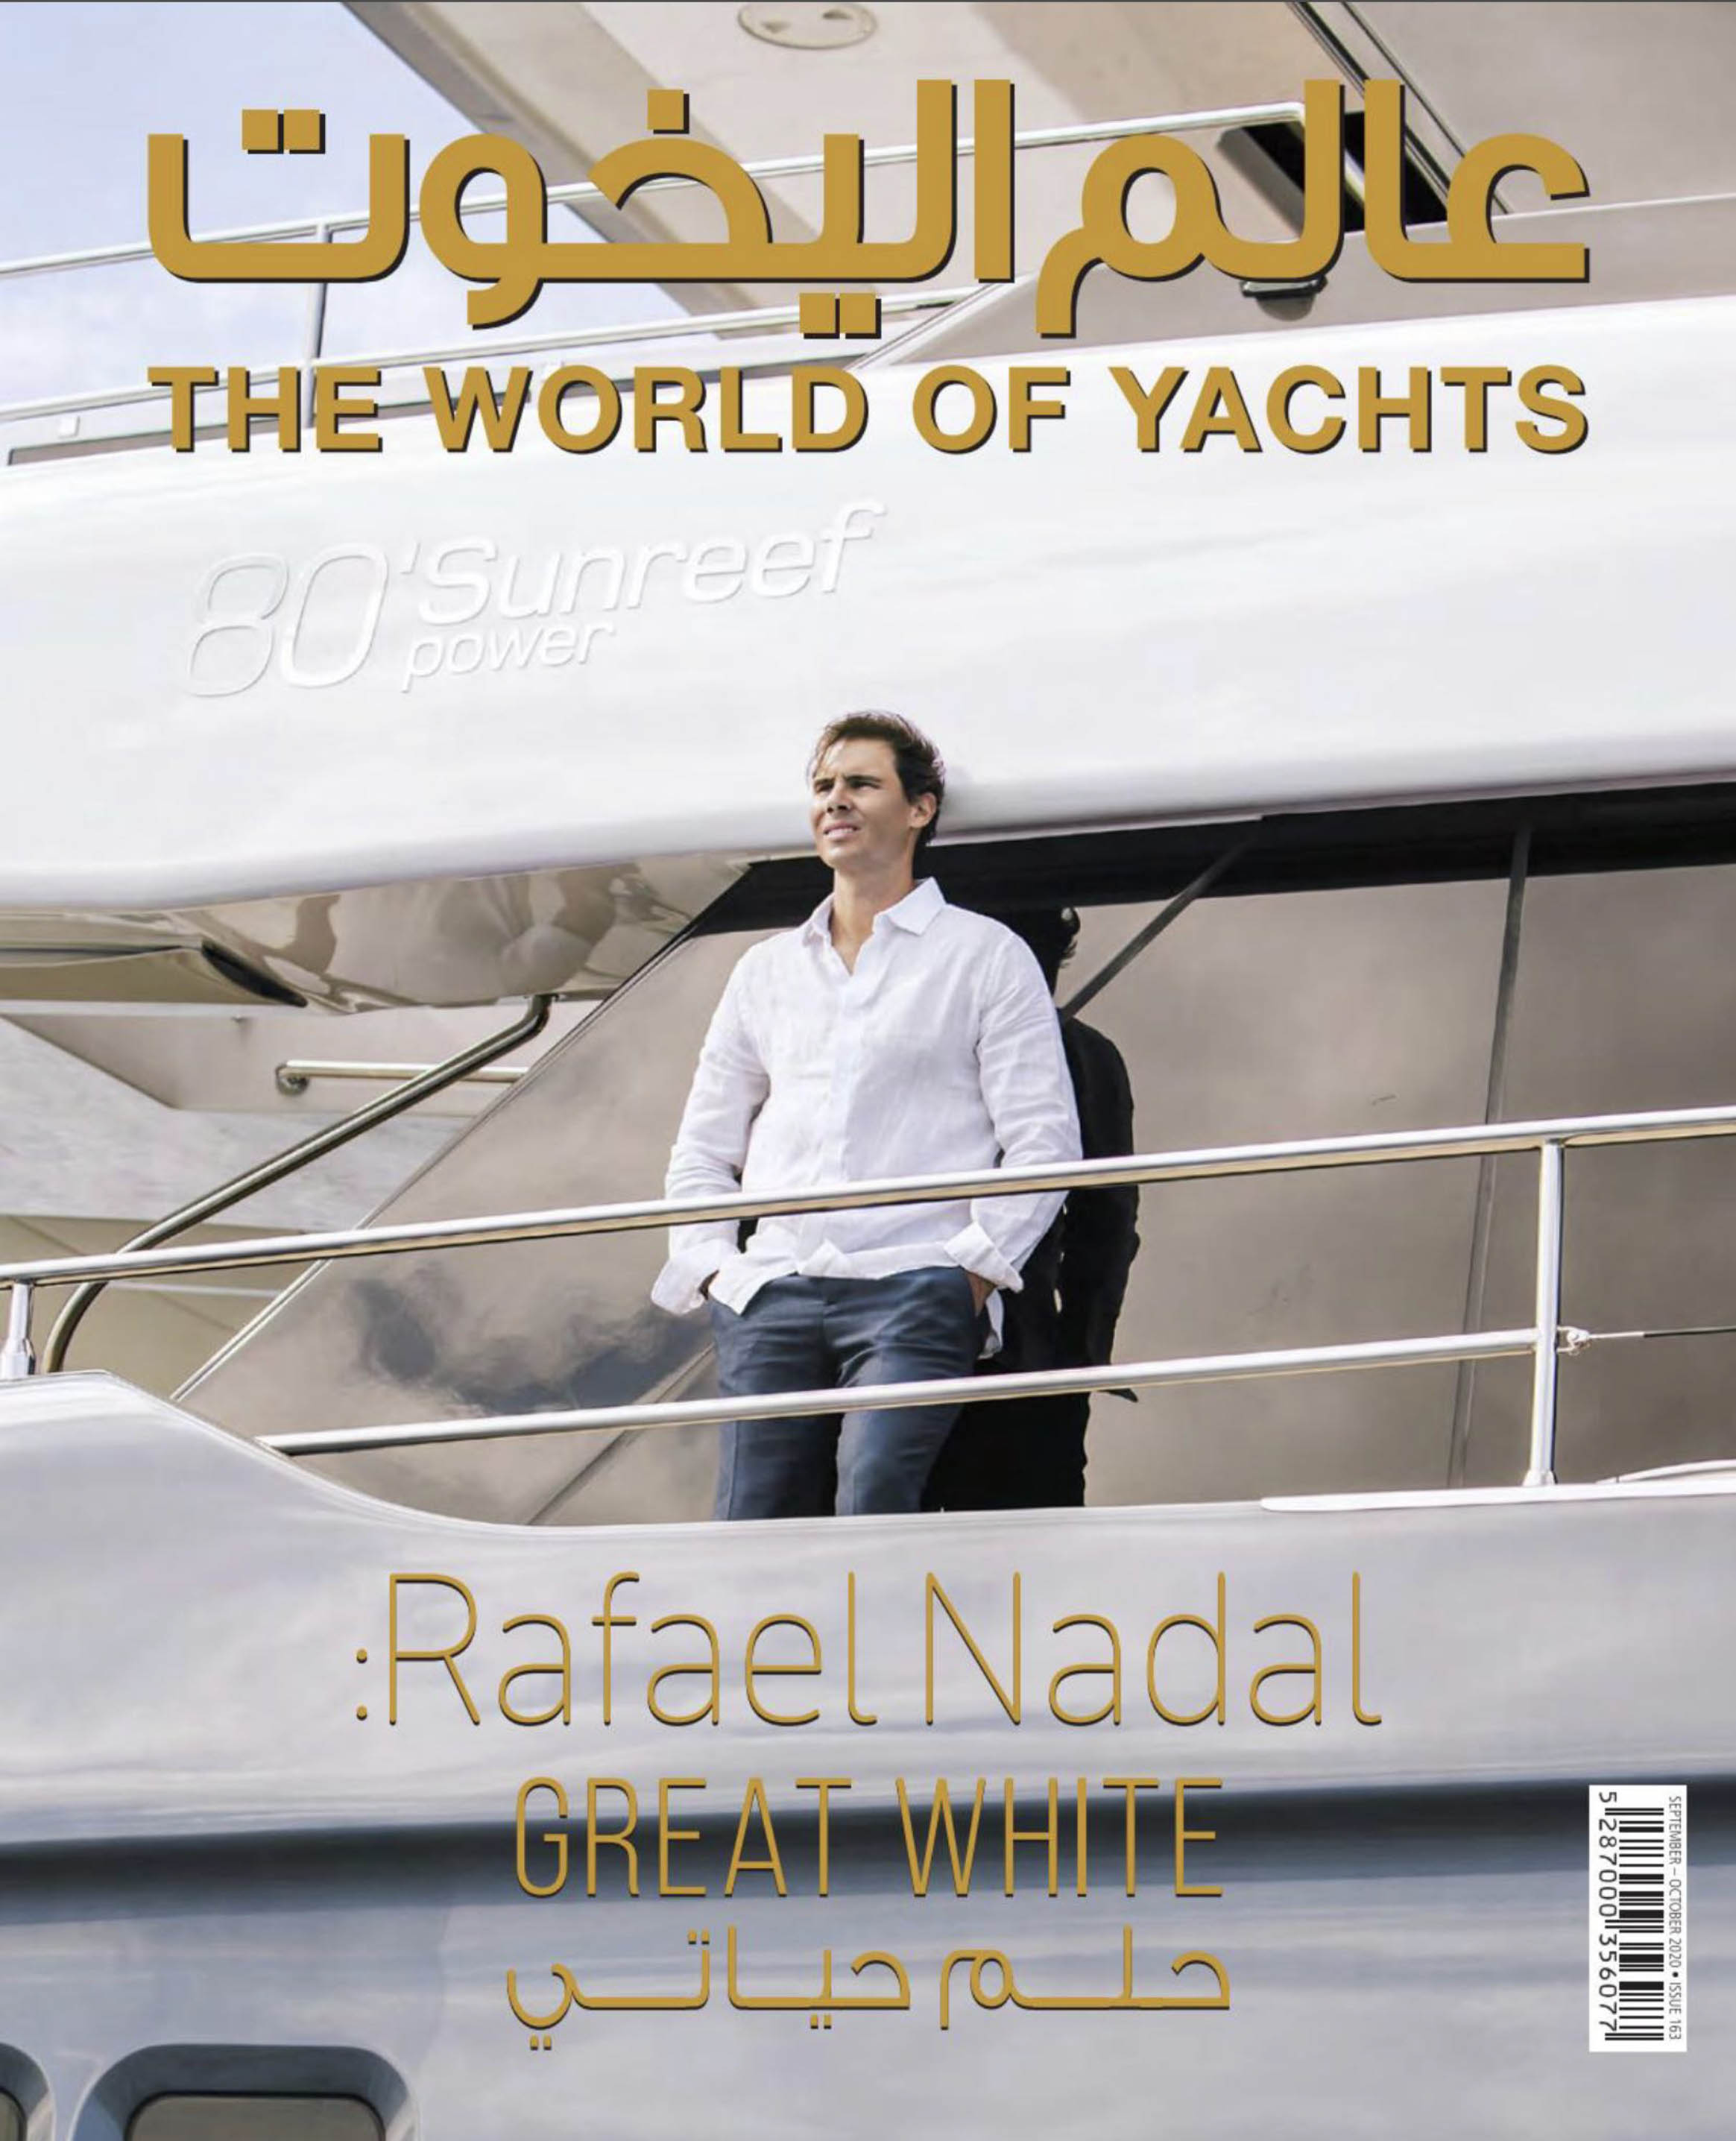  The Wolrd of Yachts, September 2020